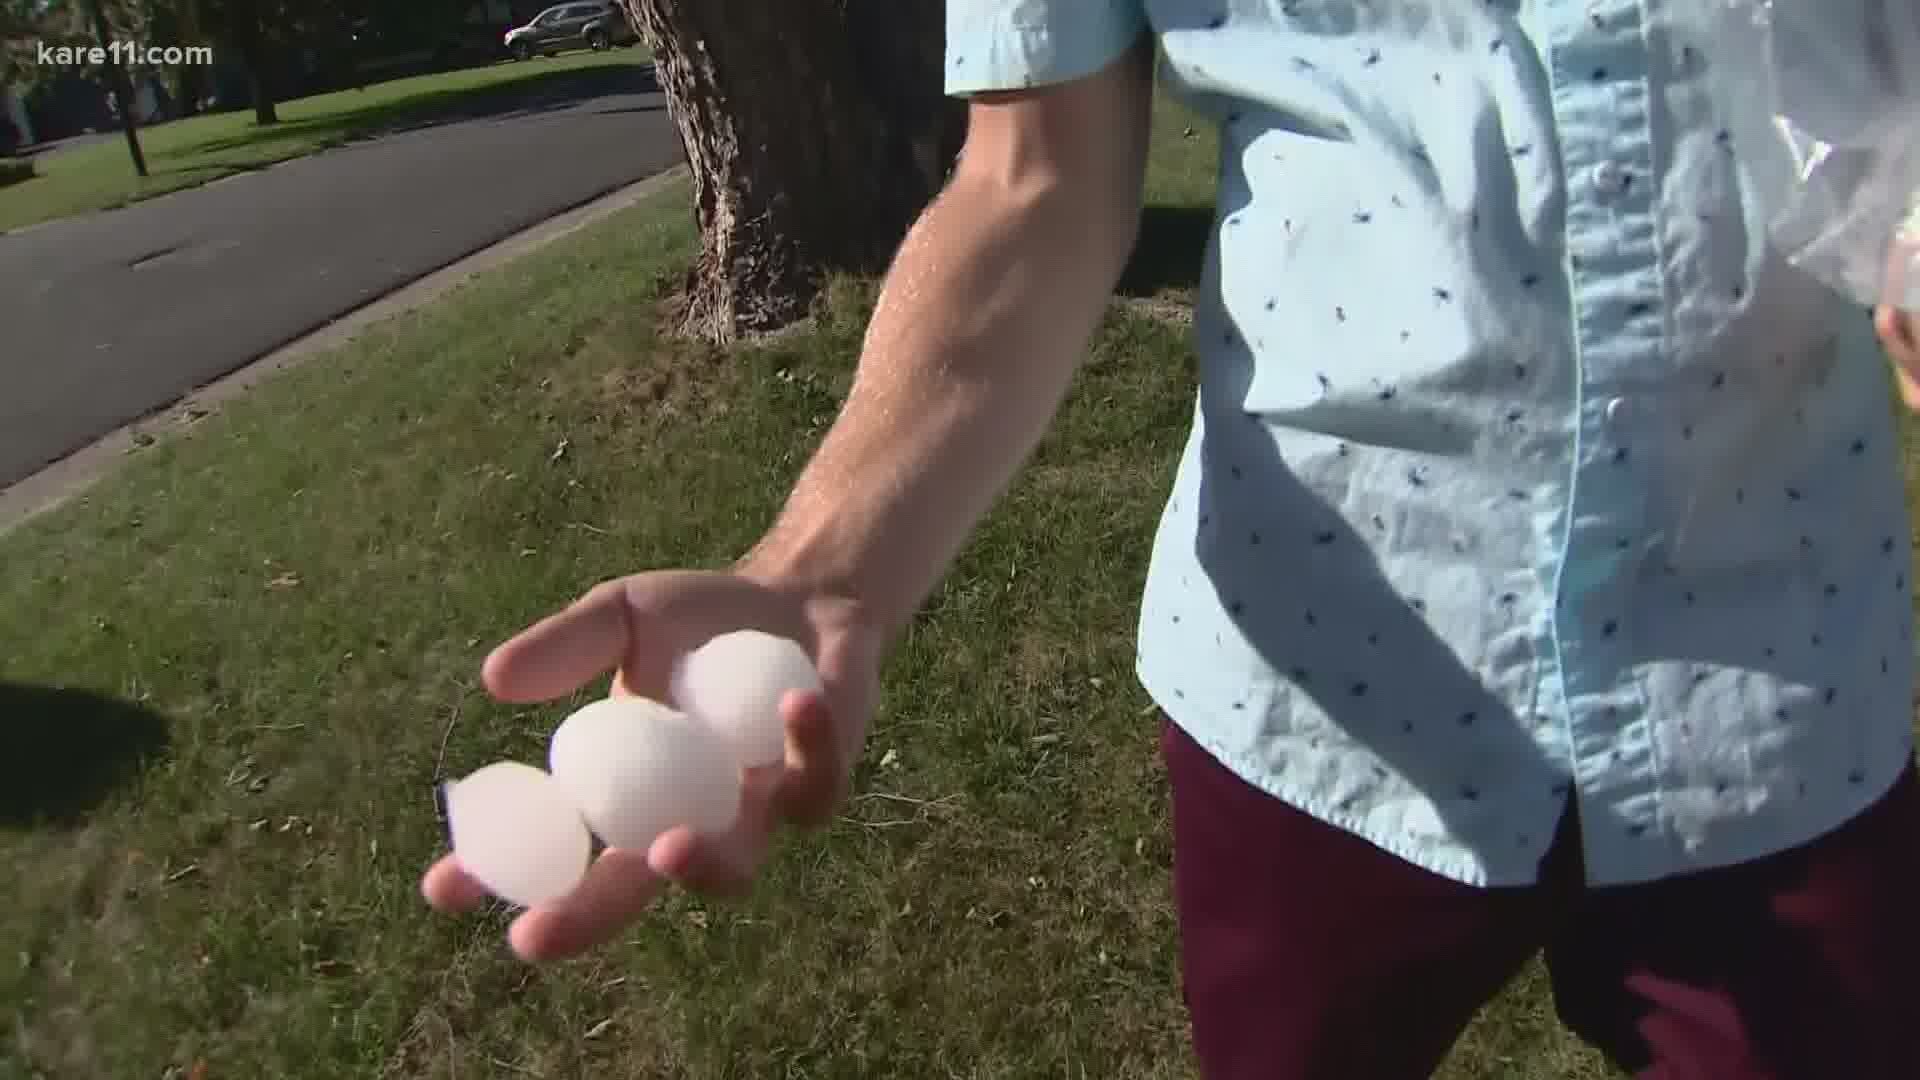 A storm left large hail behind damaging people's property. Boyd Huppert tells you what to look out for when someone offers to fix the damage.